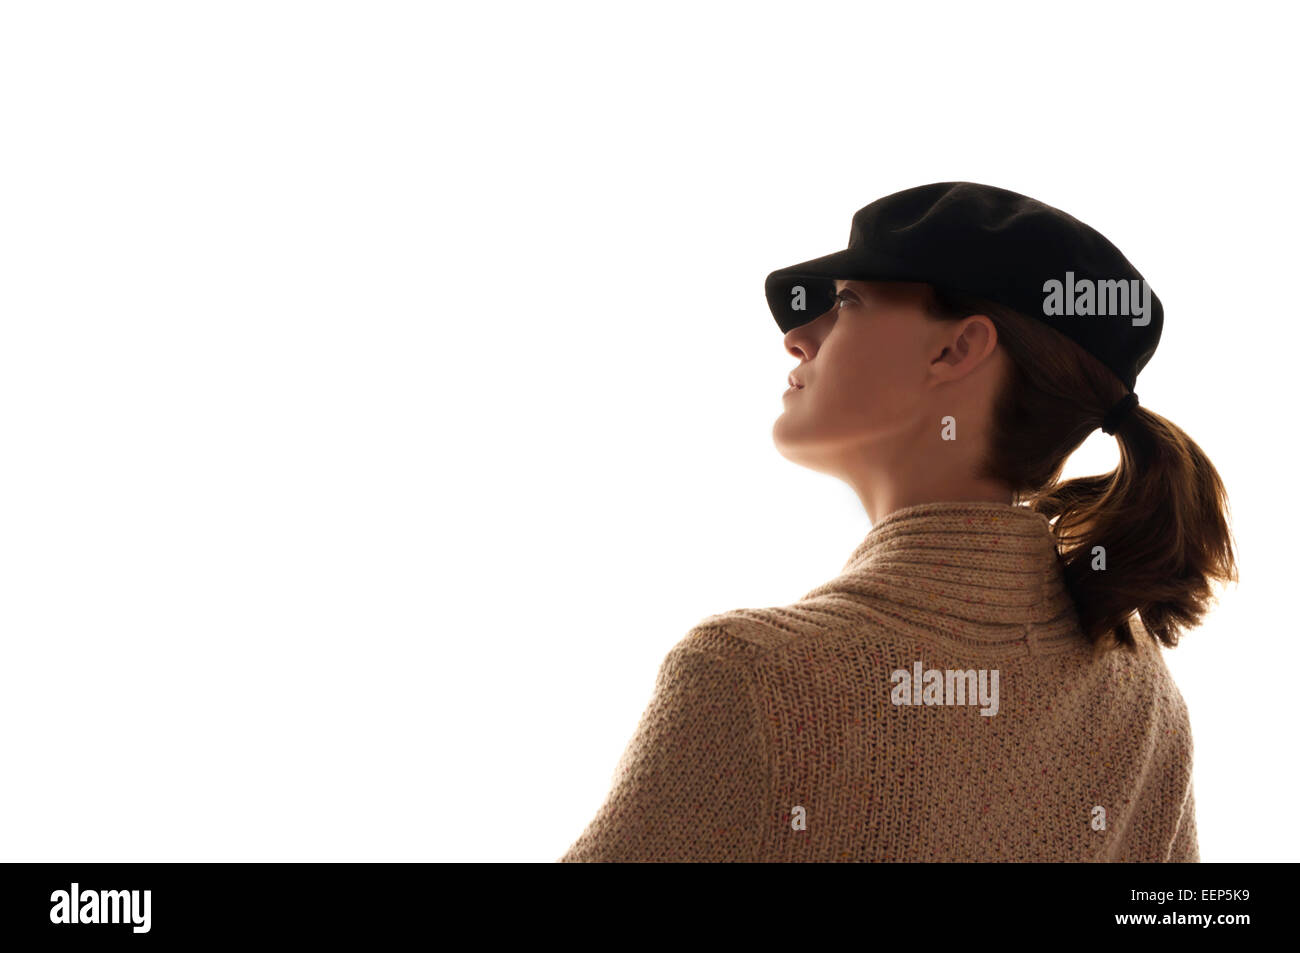 Side profile of a womans face looking upwards off in the distance she wears a black hat, hair in ponytail and a tan sweater. Stock Photo